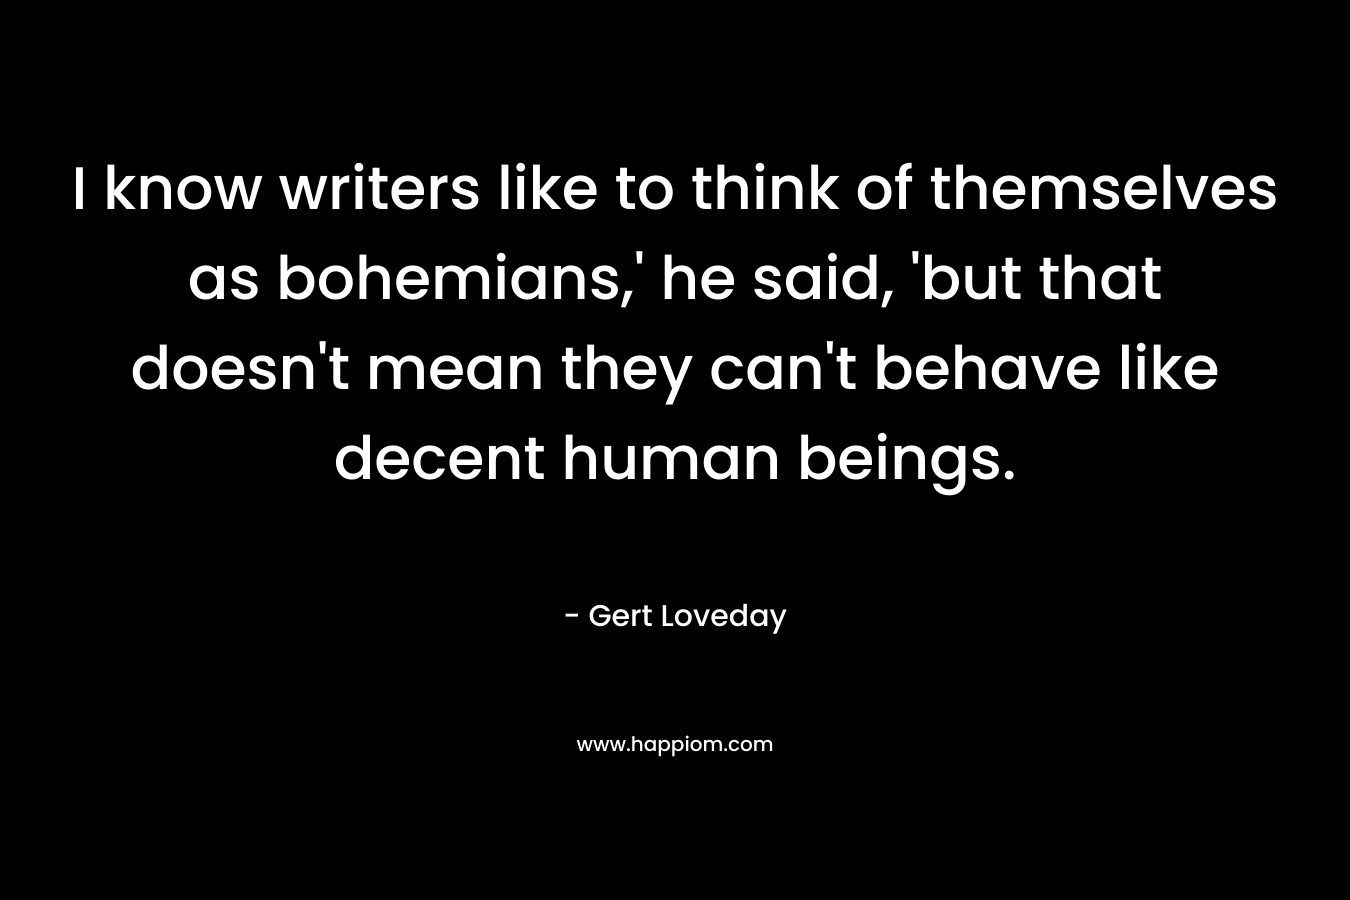 I know writers like to think of themselves as bohemians,’ he said, ‘but that doesn’t mean they can’t behave like decent human beings. – Gert Loveday